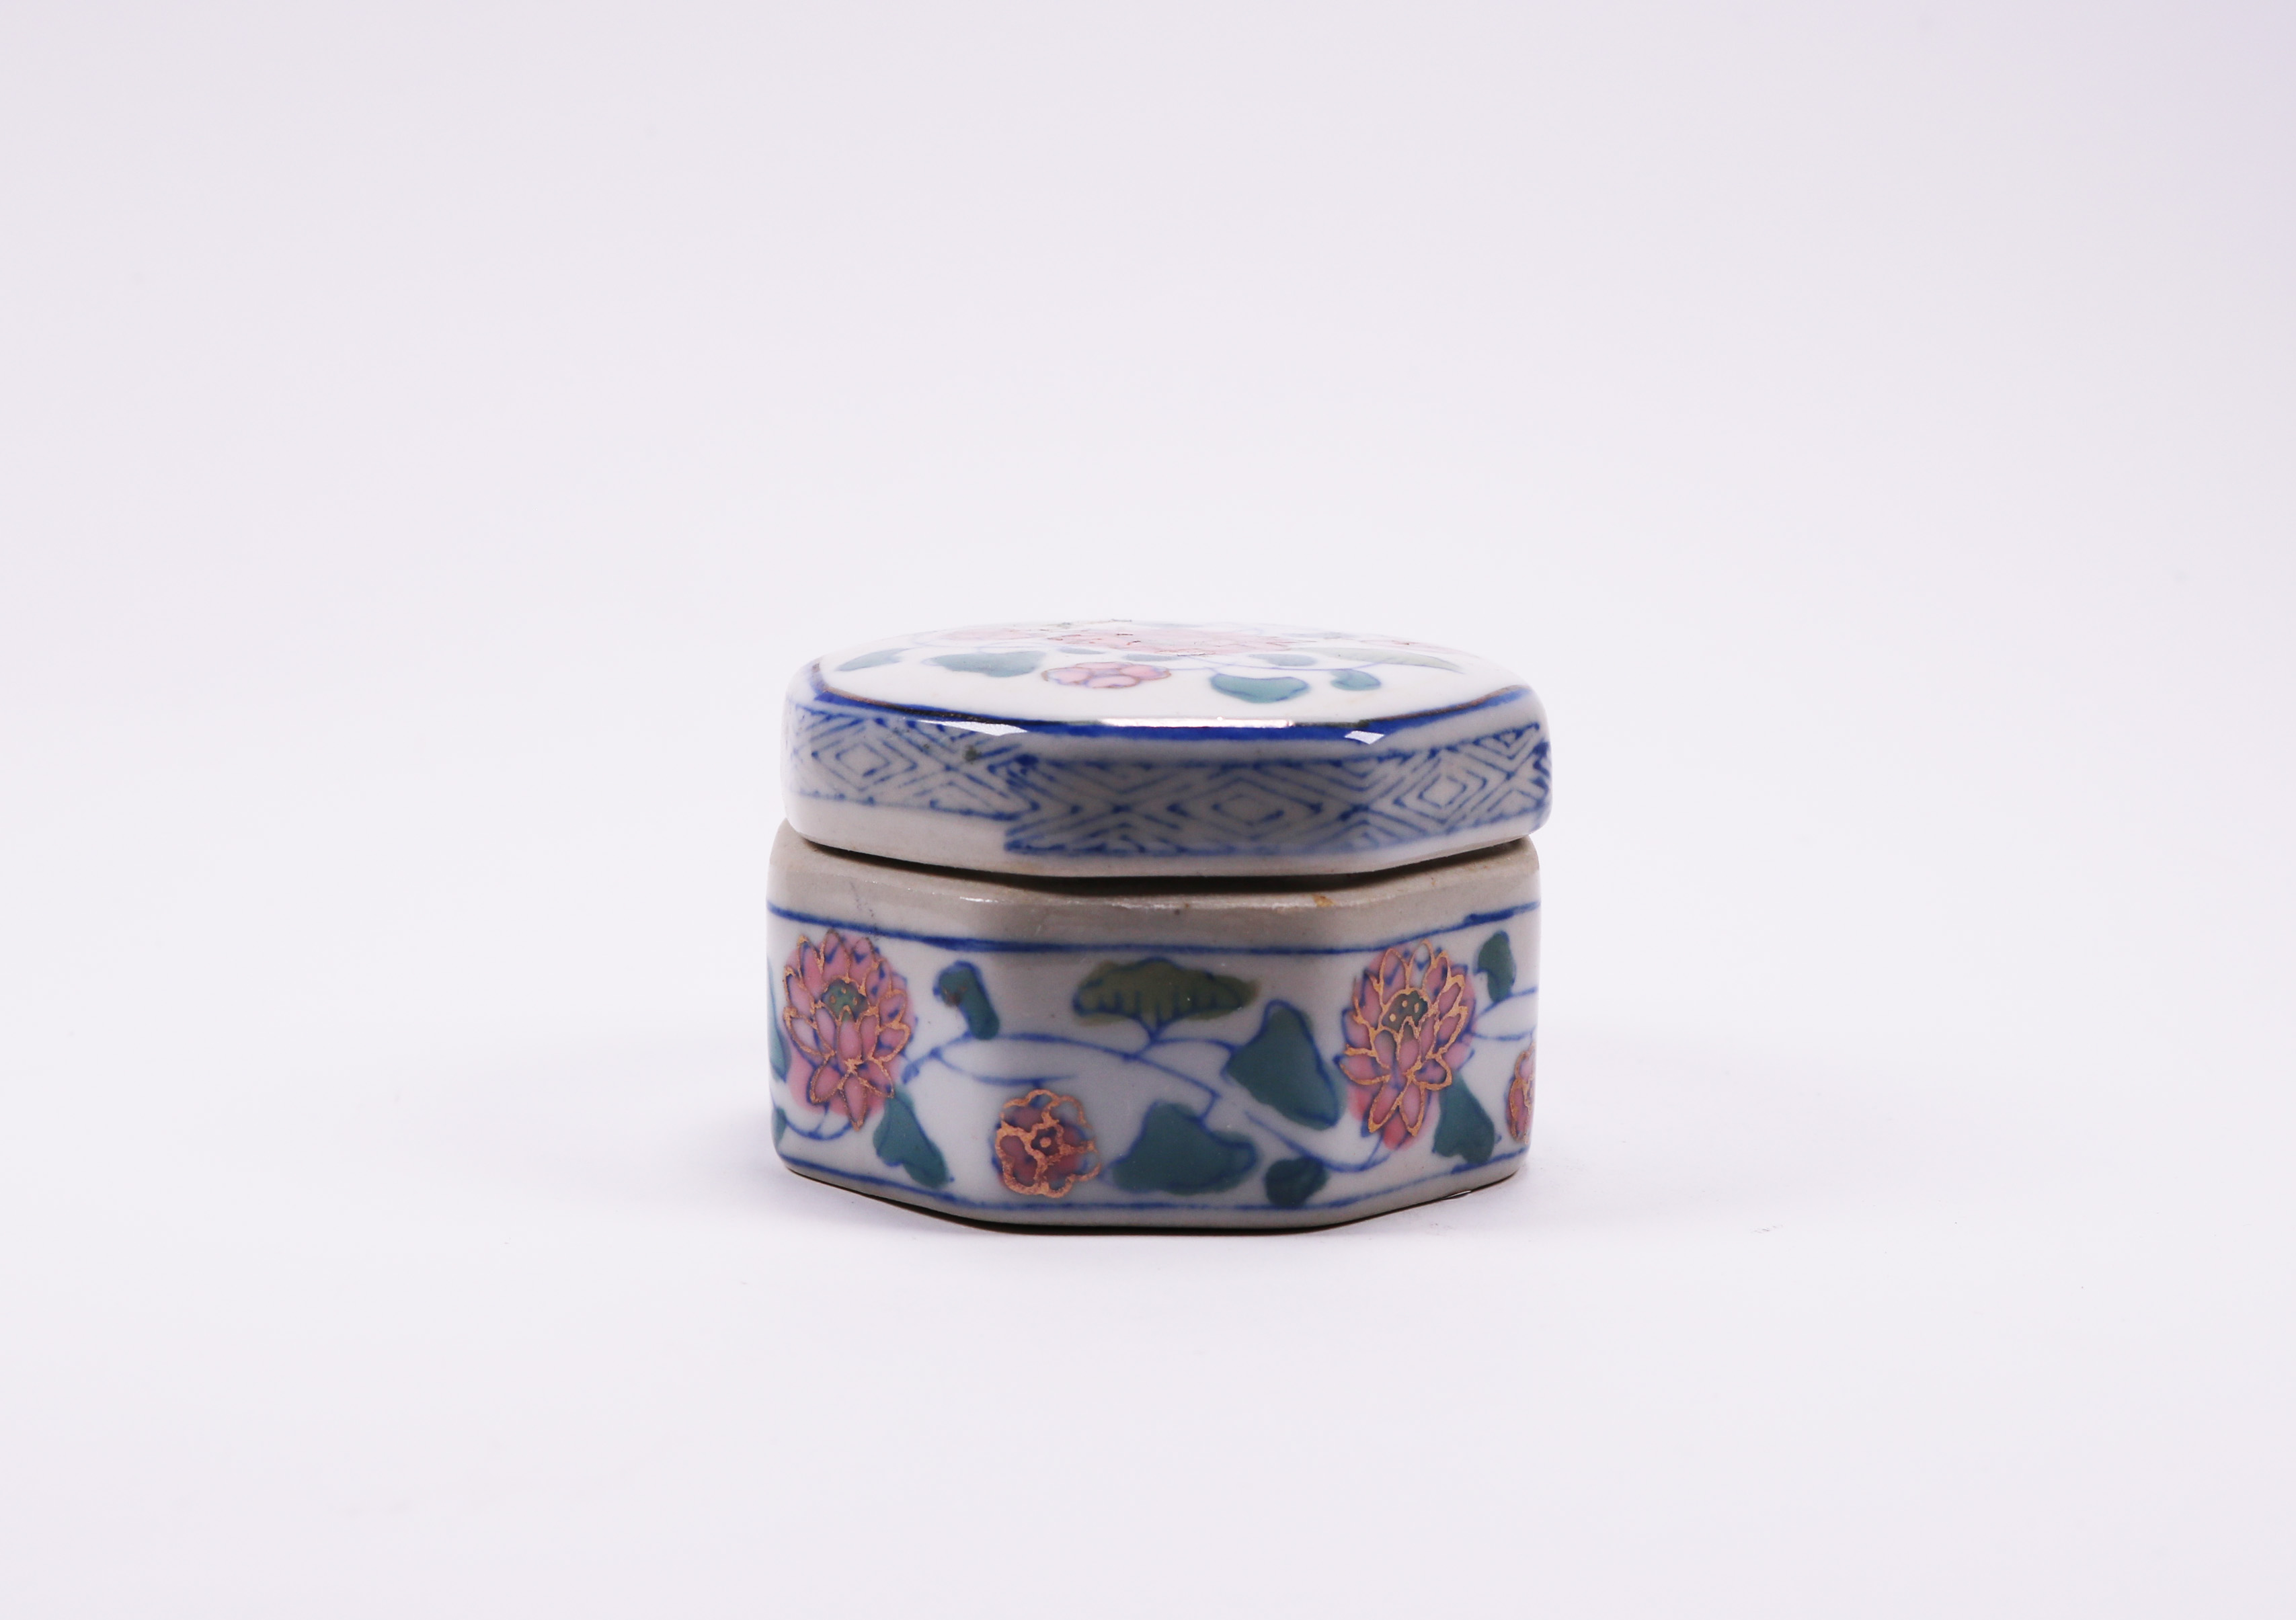 Vintage Porcelain Trinket Ring Box With Blue And White Flowers, Hexagon Shaped Trinket Box